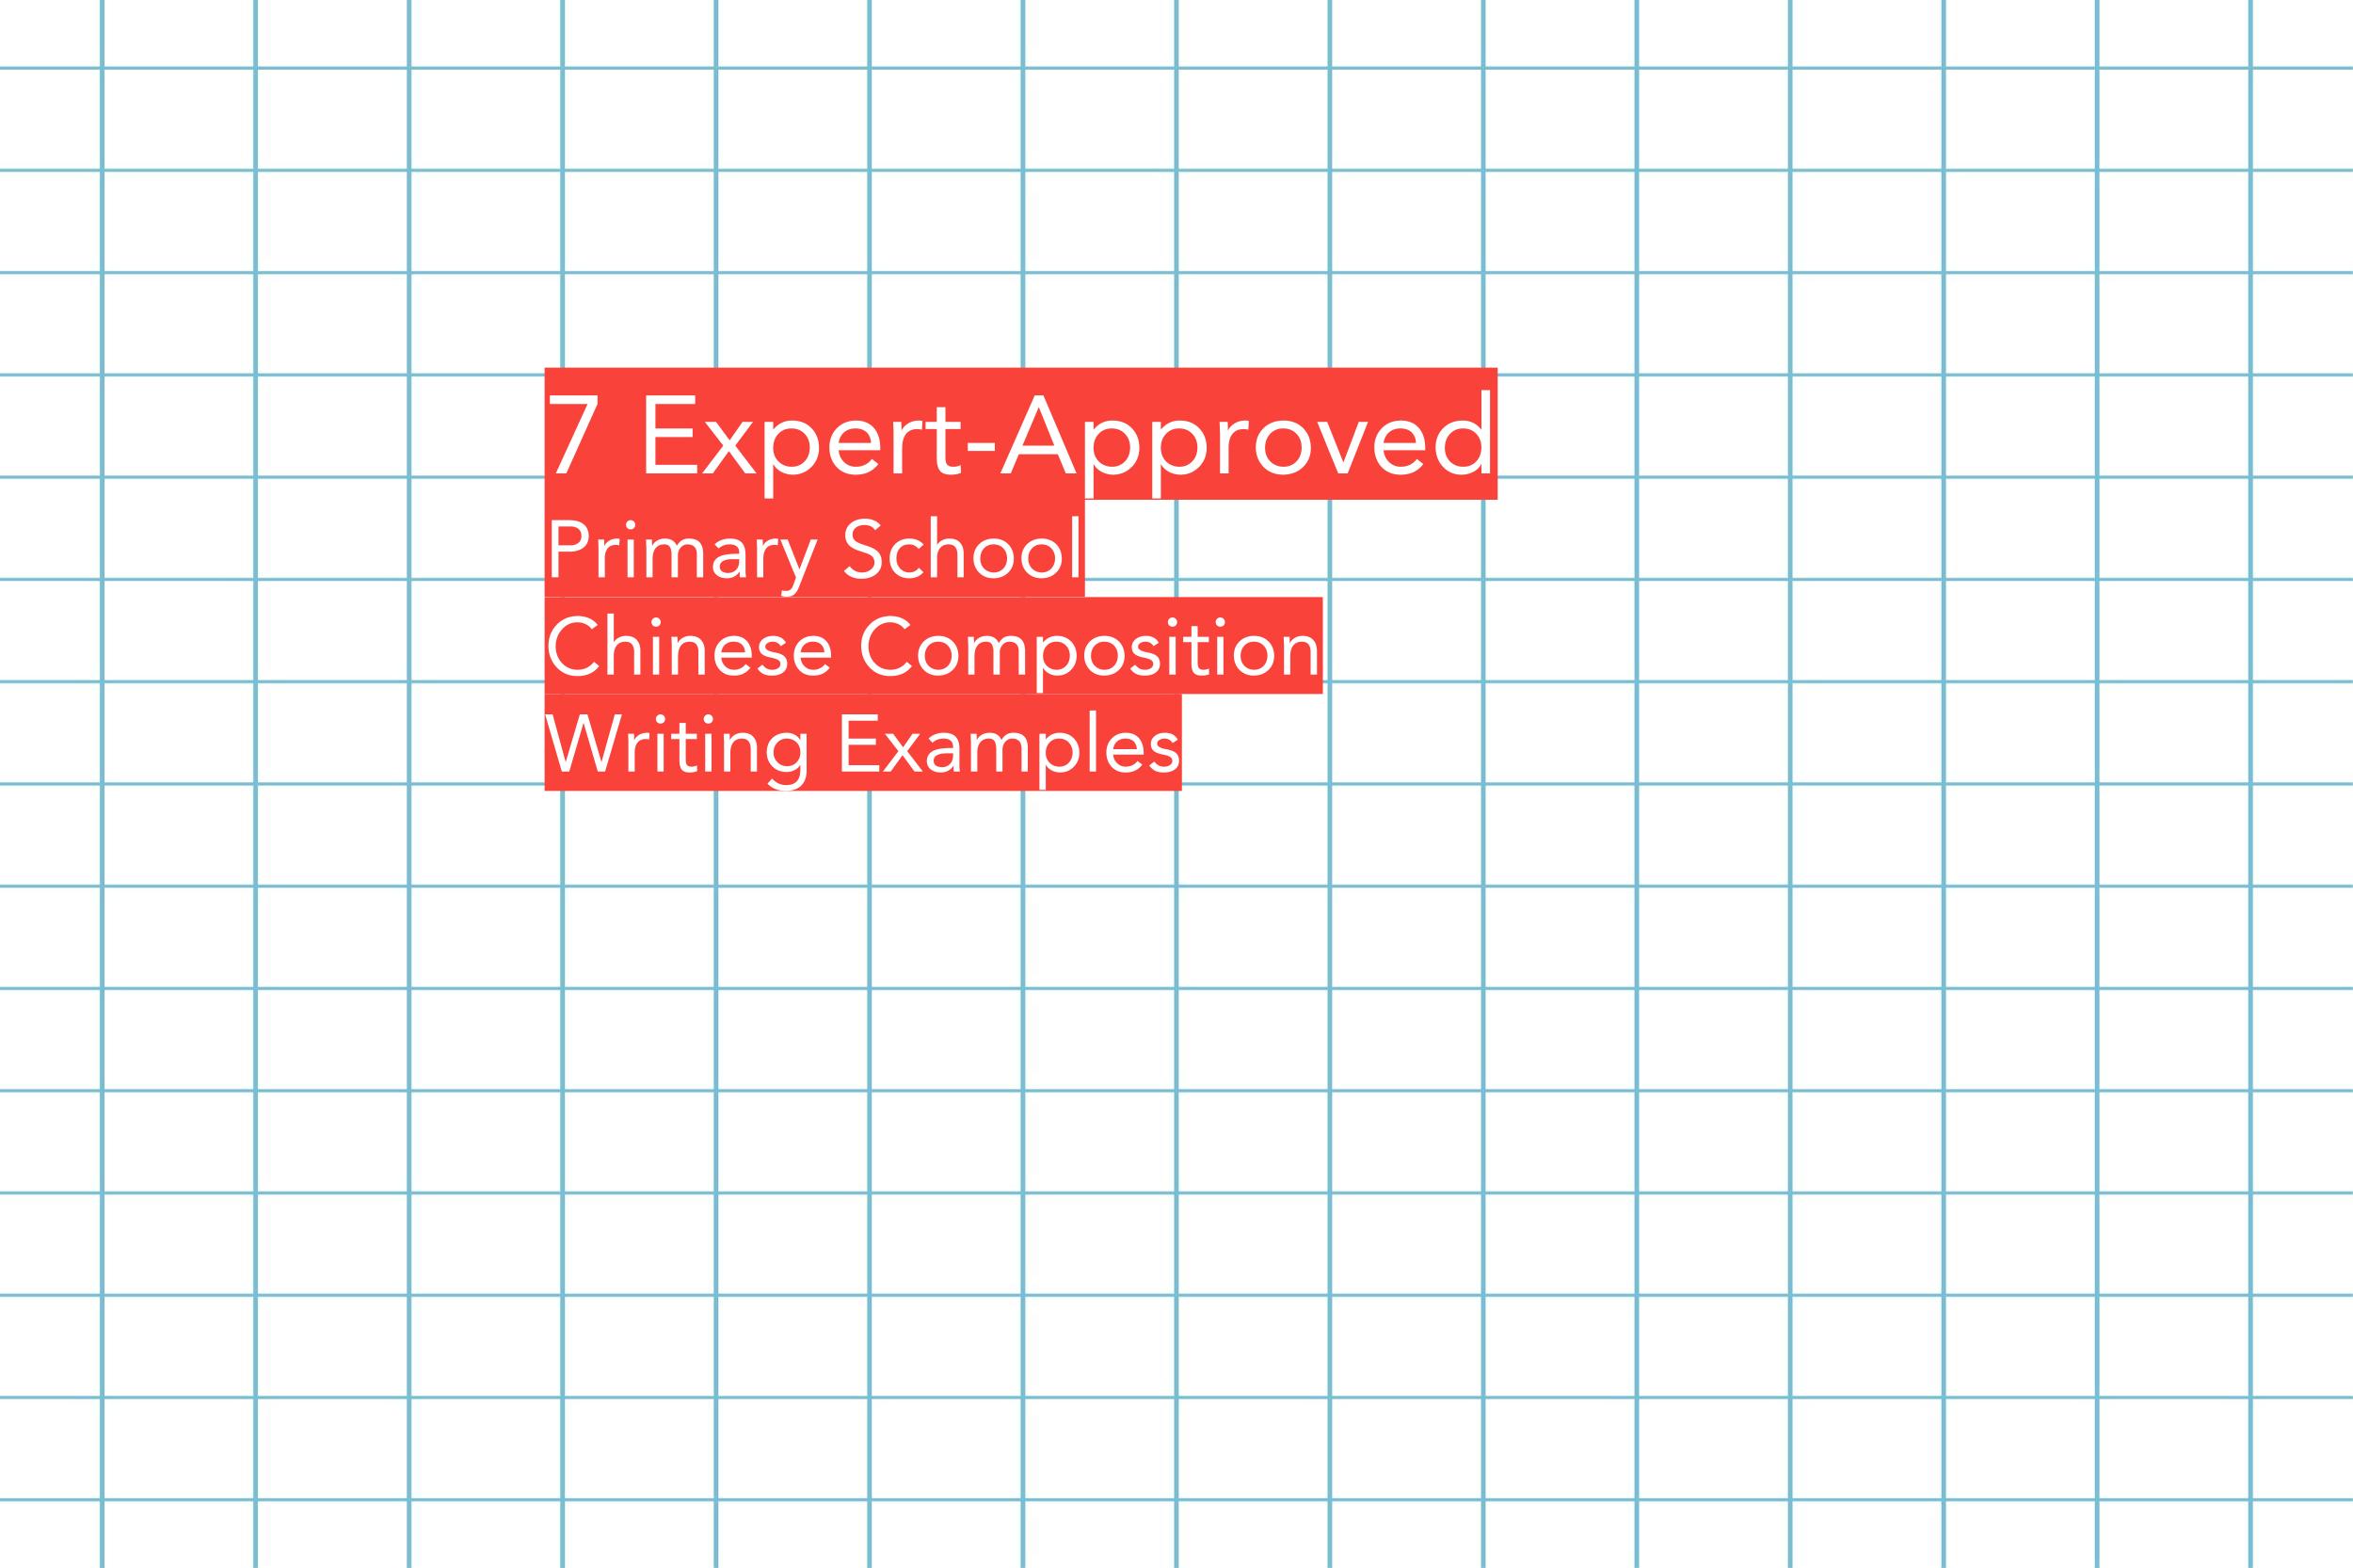 7 Expert-Approved Primary School Chinese Composition Writing Examples 2